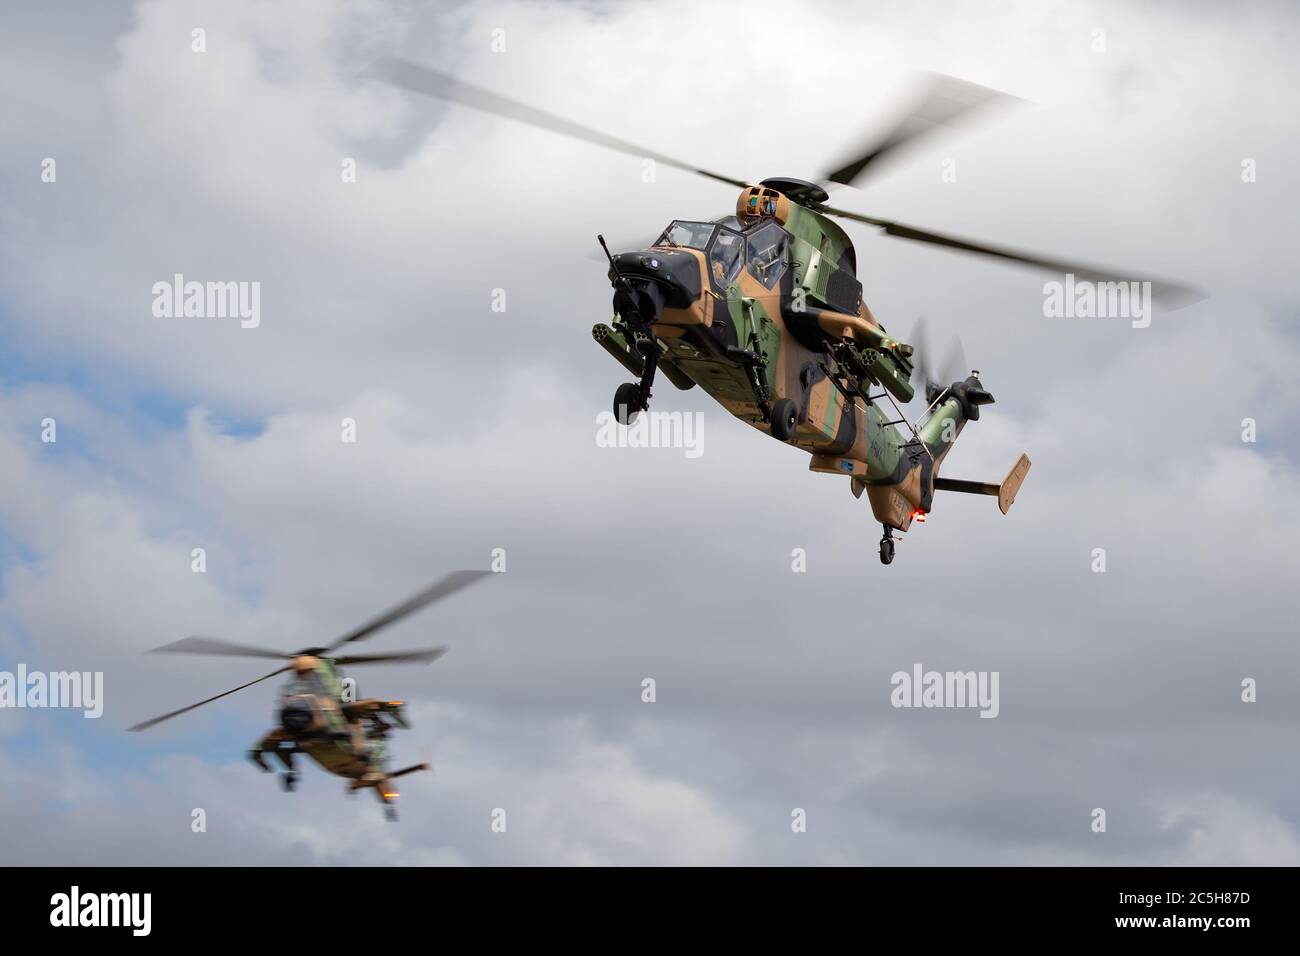 Two Australian Army Eurocopter Tiger ARH Armed reconnaissance helicopters. Stock Photo